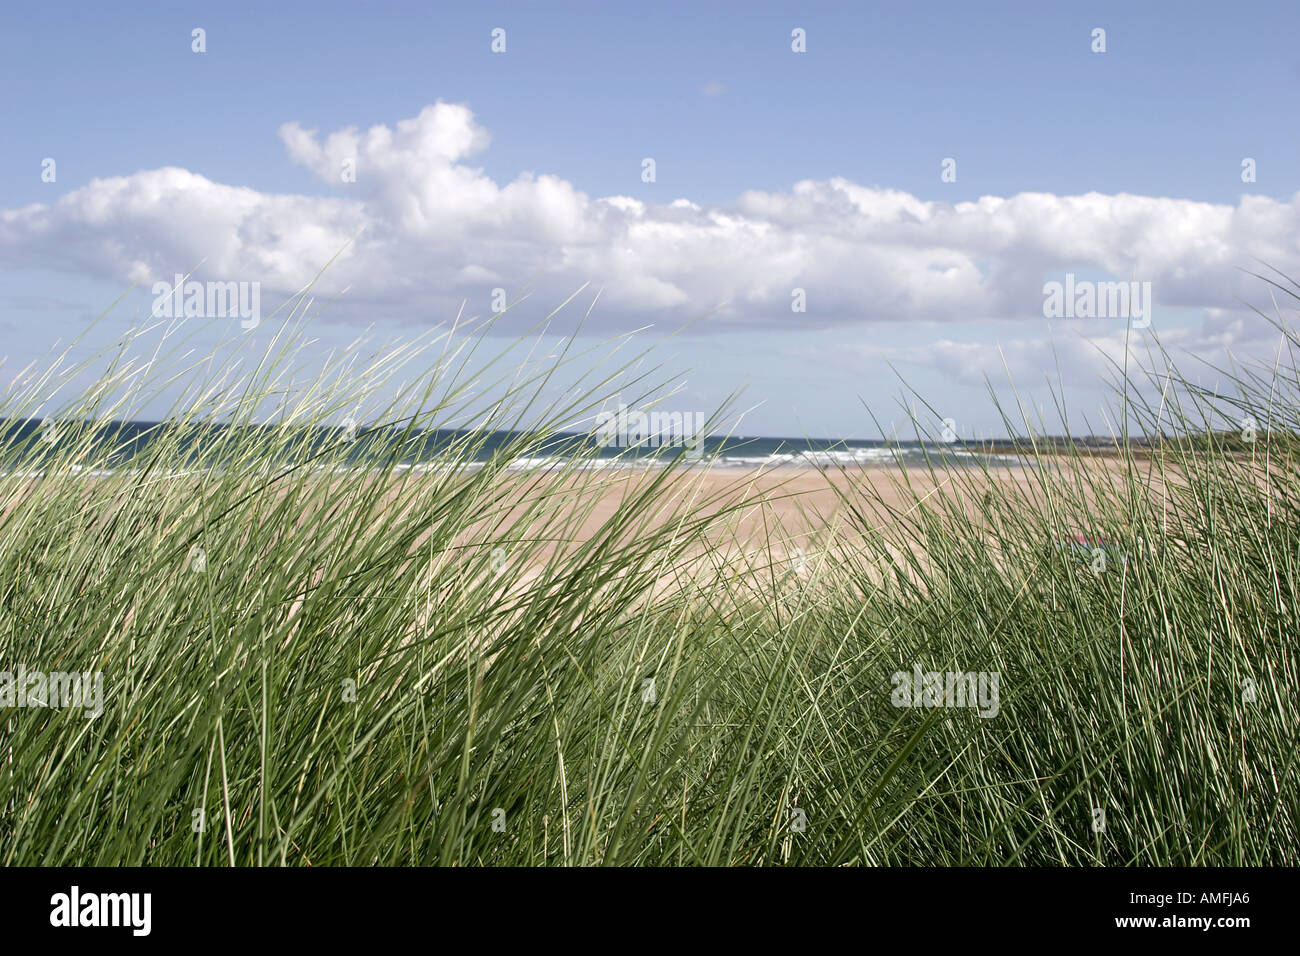 landscape shot of beach grass in foreground with beach and sea in background showing blue sky with white clouds Stock Photo